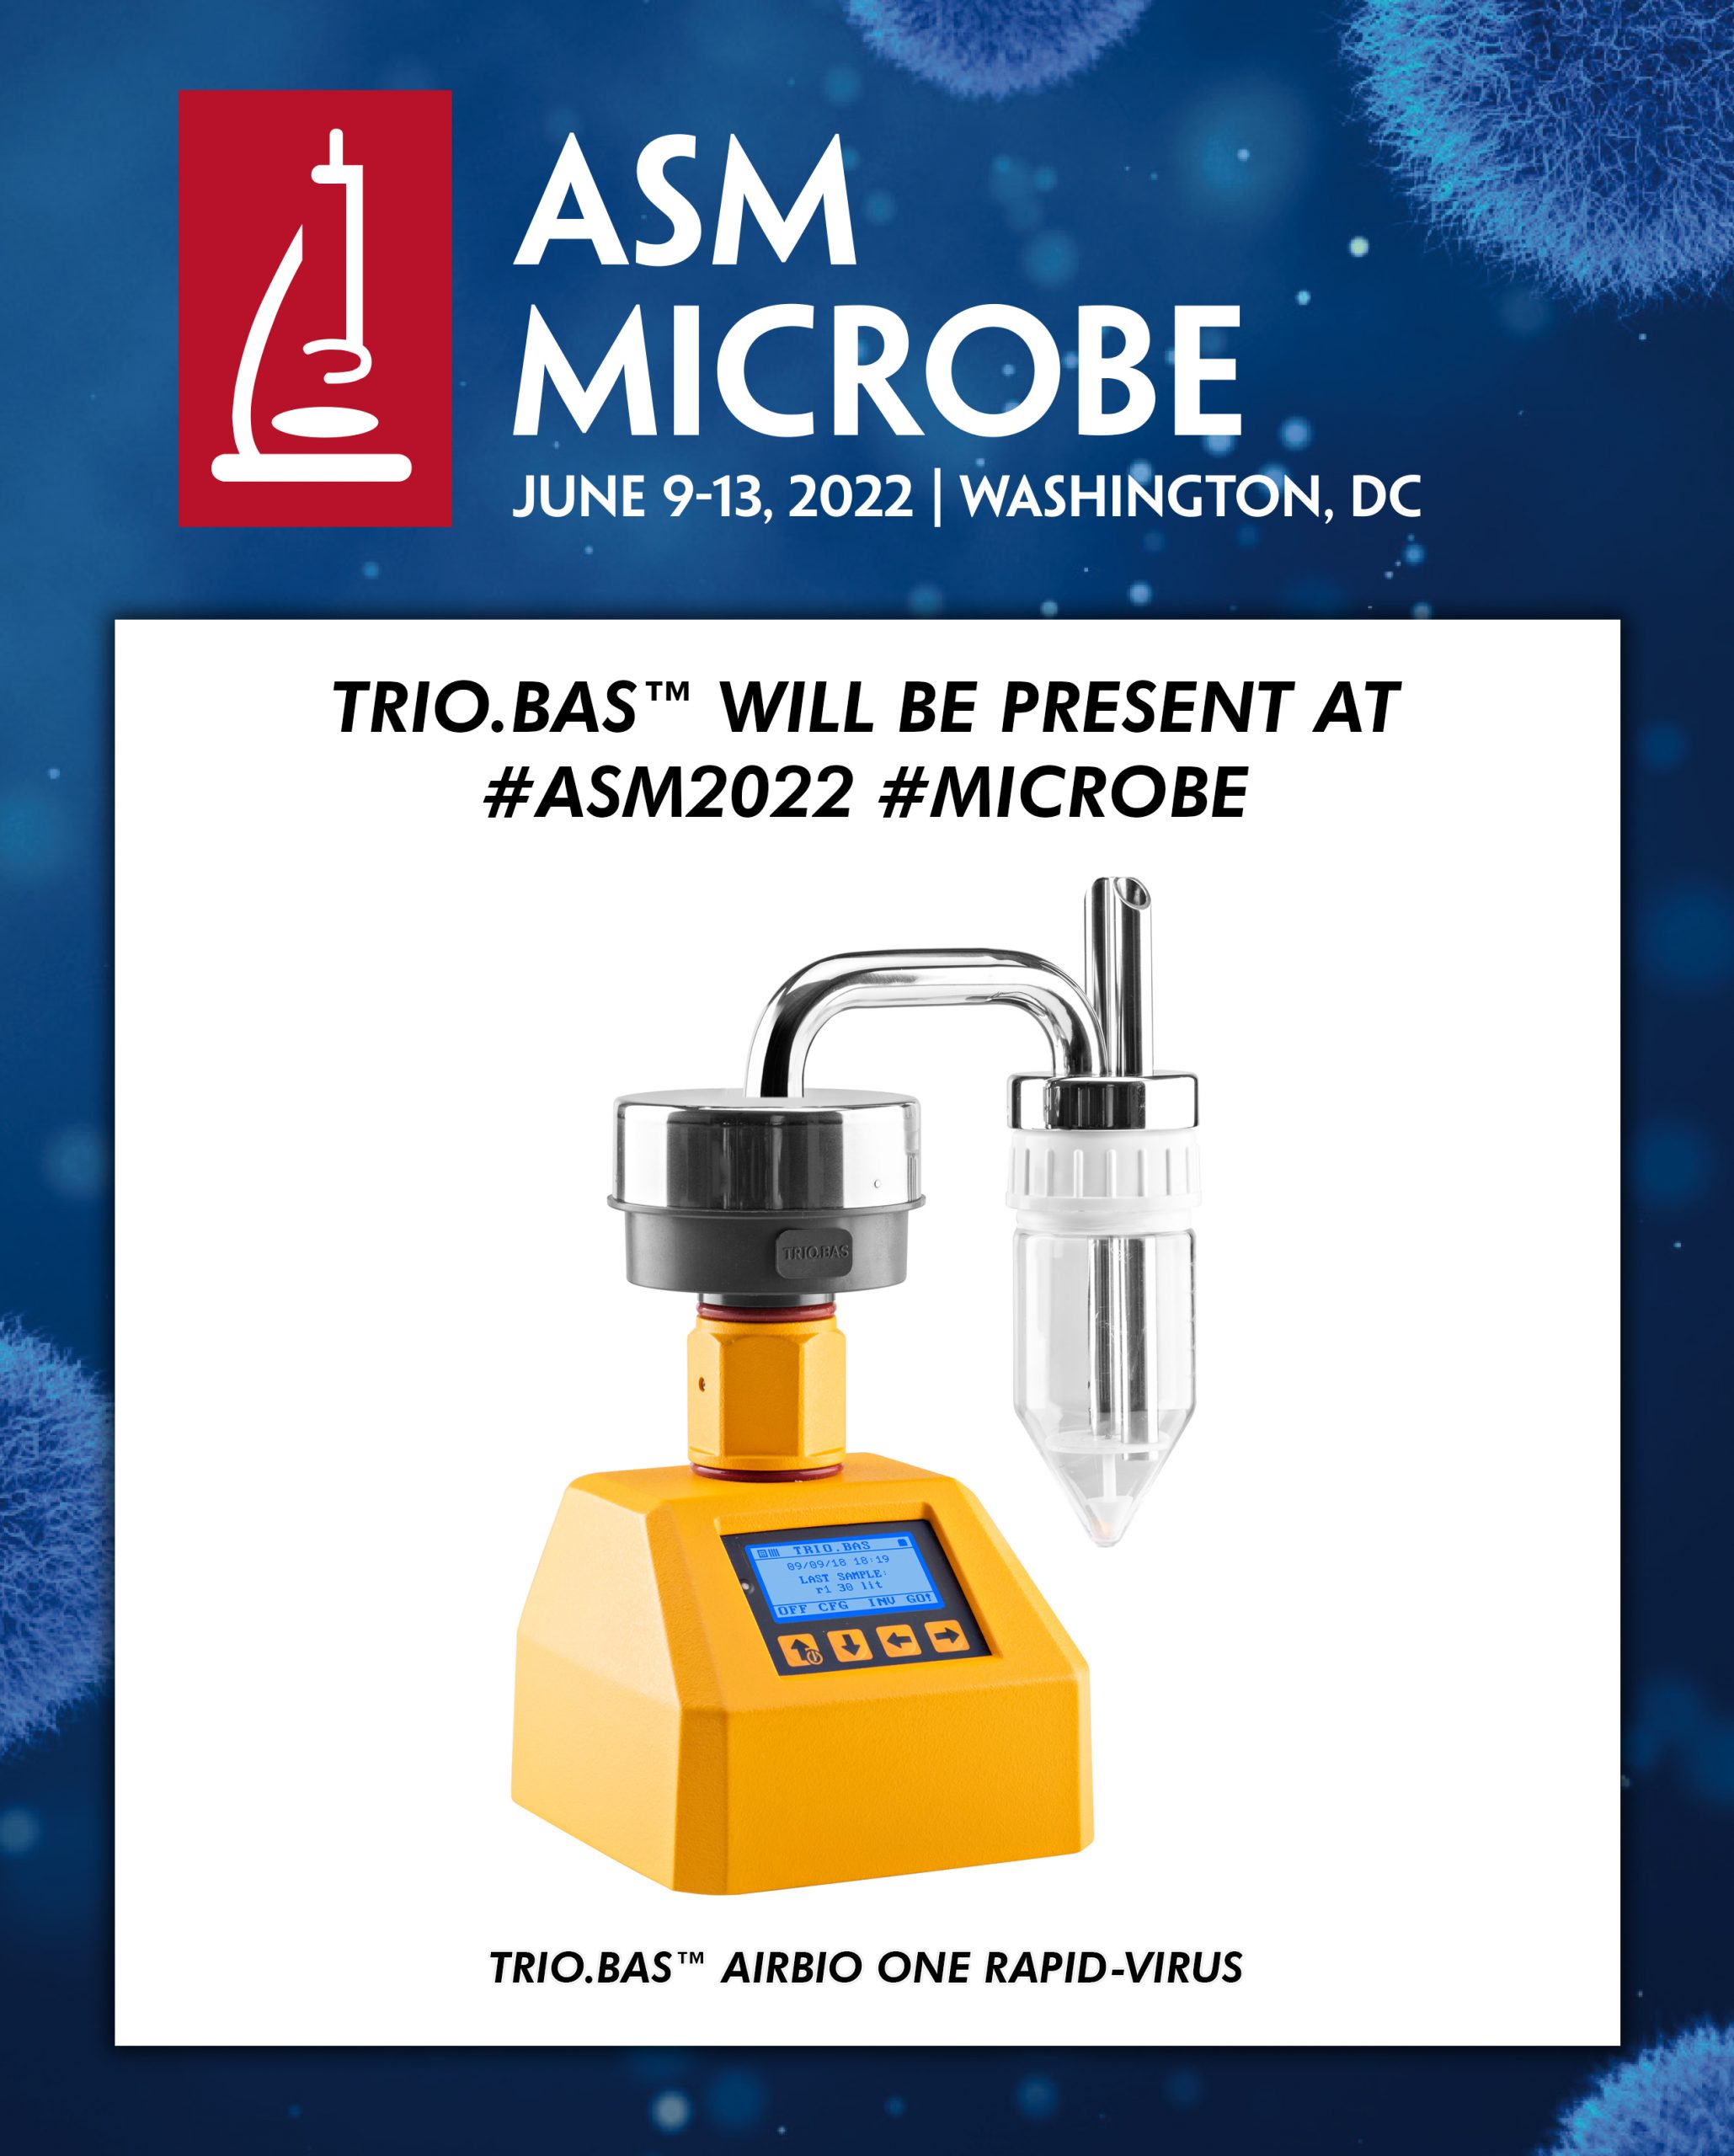 We will be present at the ASM Microbe 2022 ORUM INTERNATIONAL © All